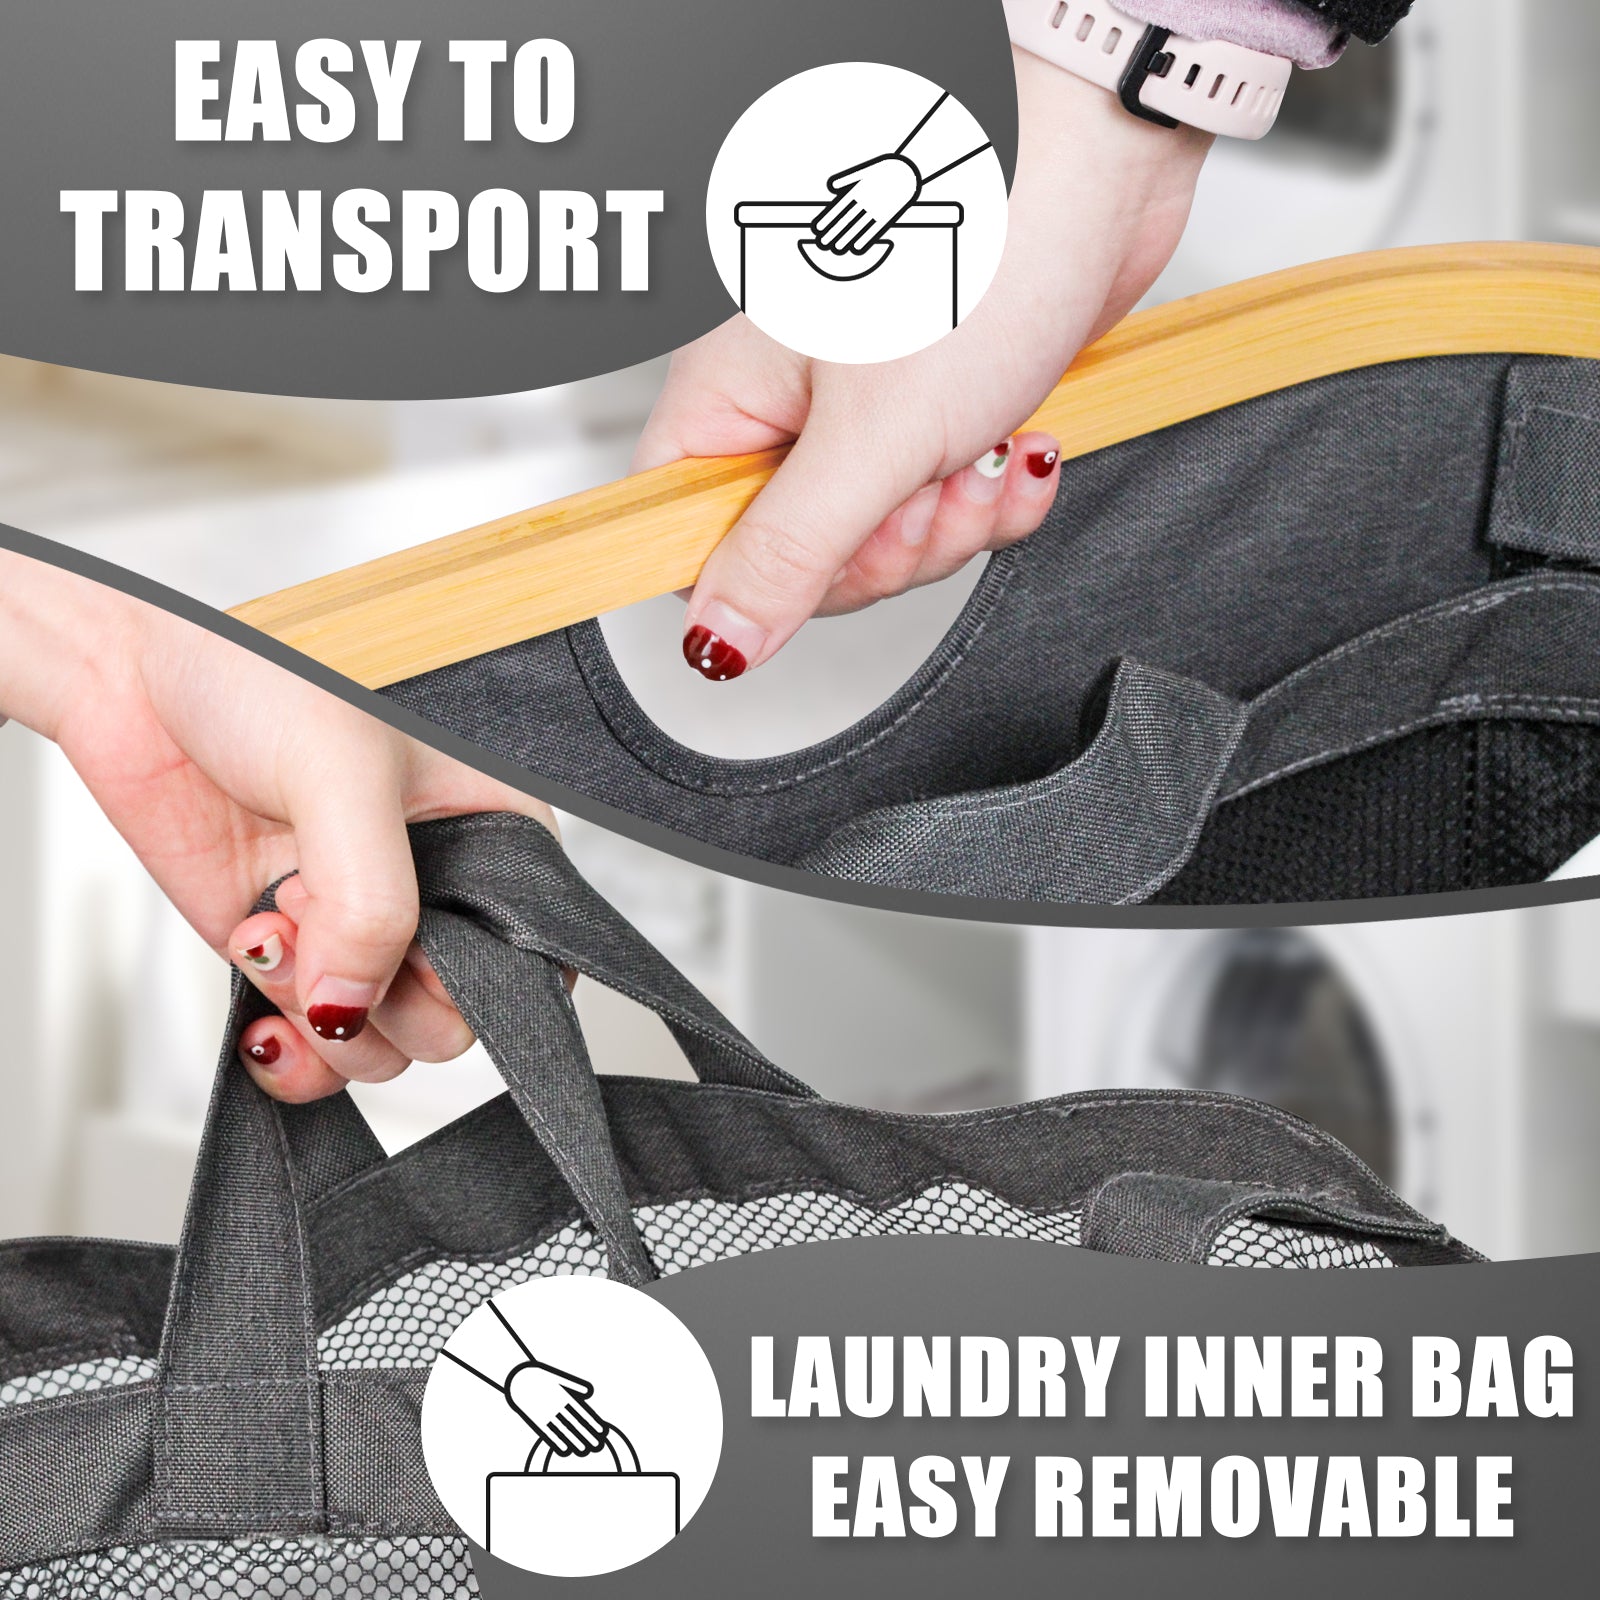 5 x Large Laundry Bags, Laundry Bags